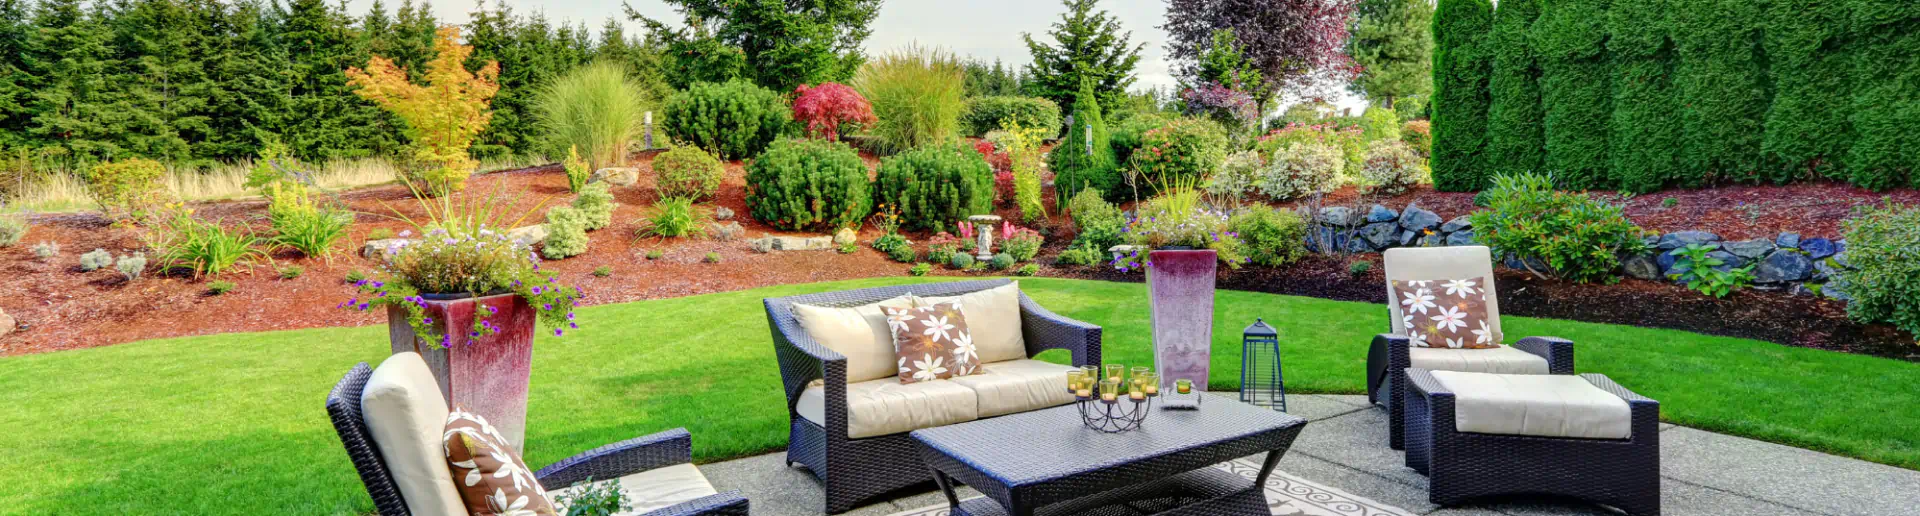 outdoor space with some grey sofas and grass bushes around